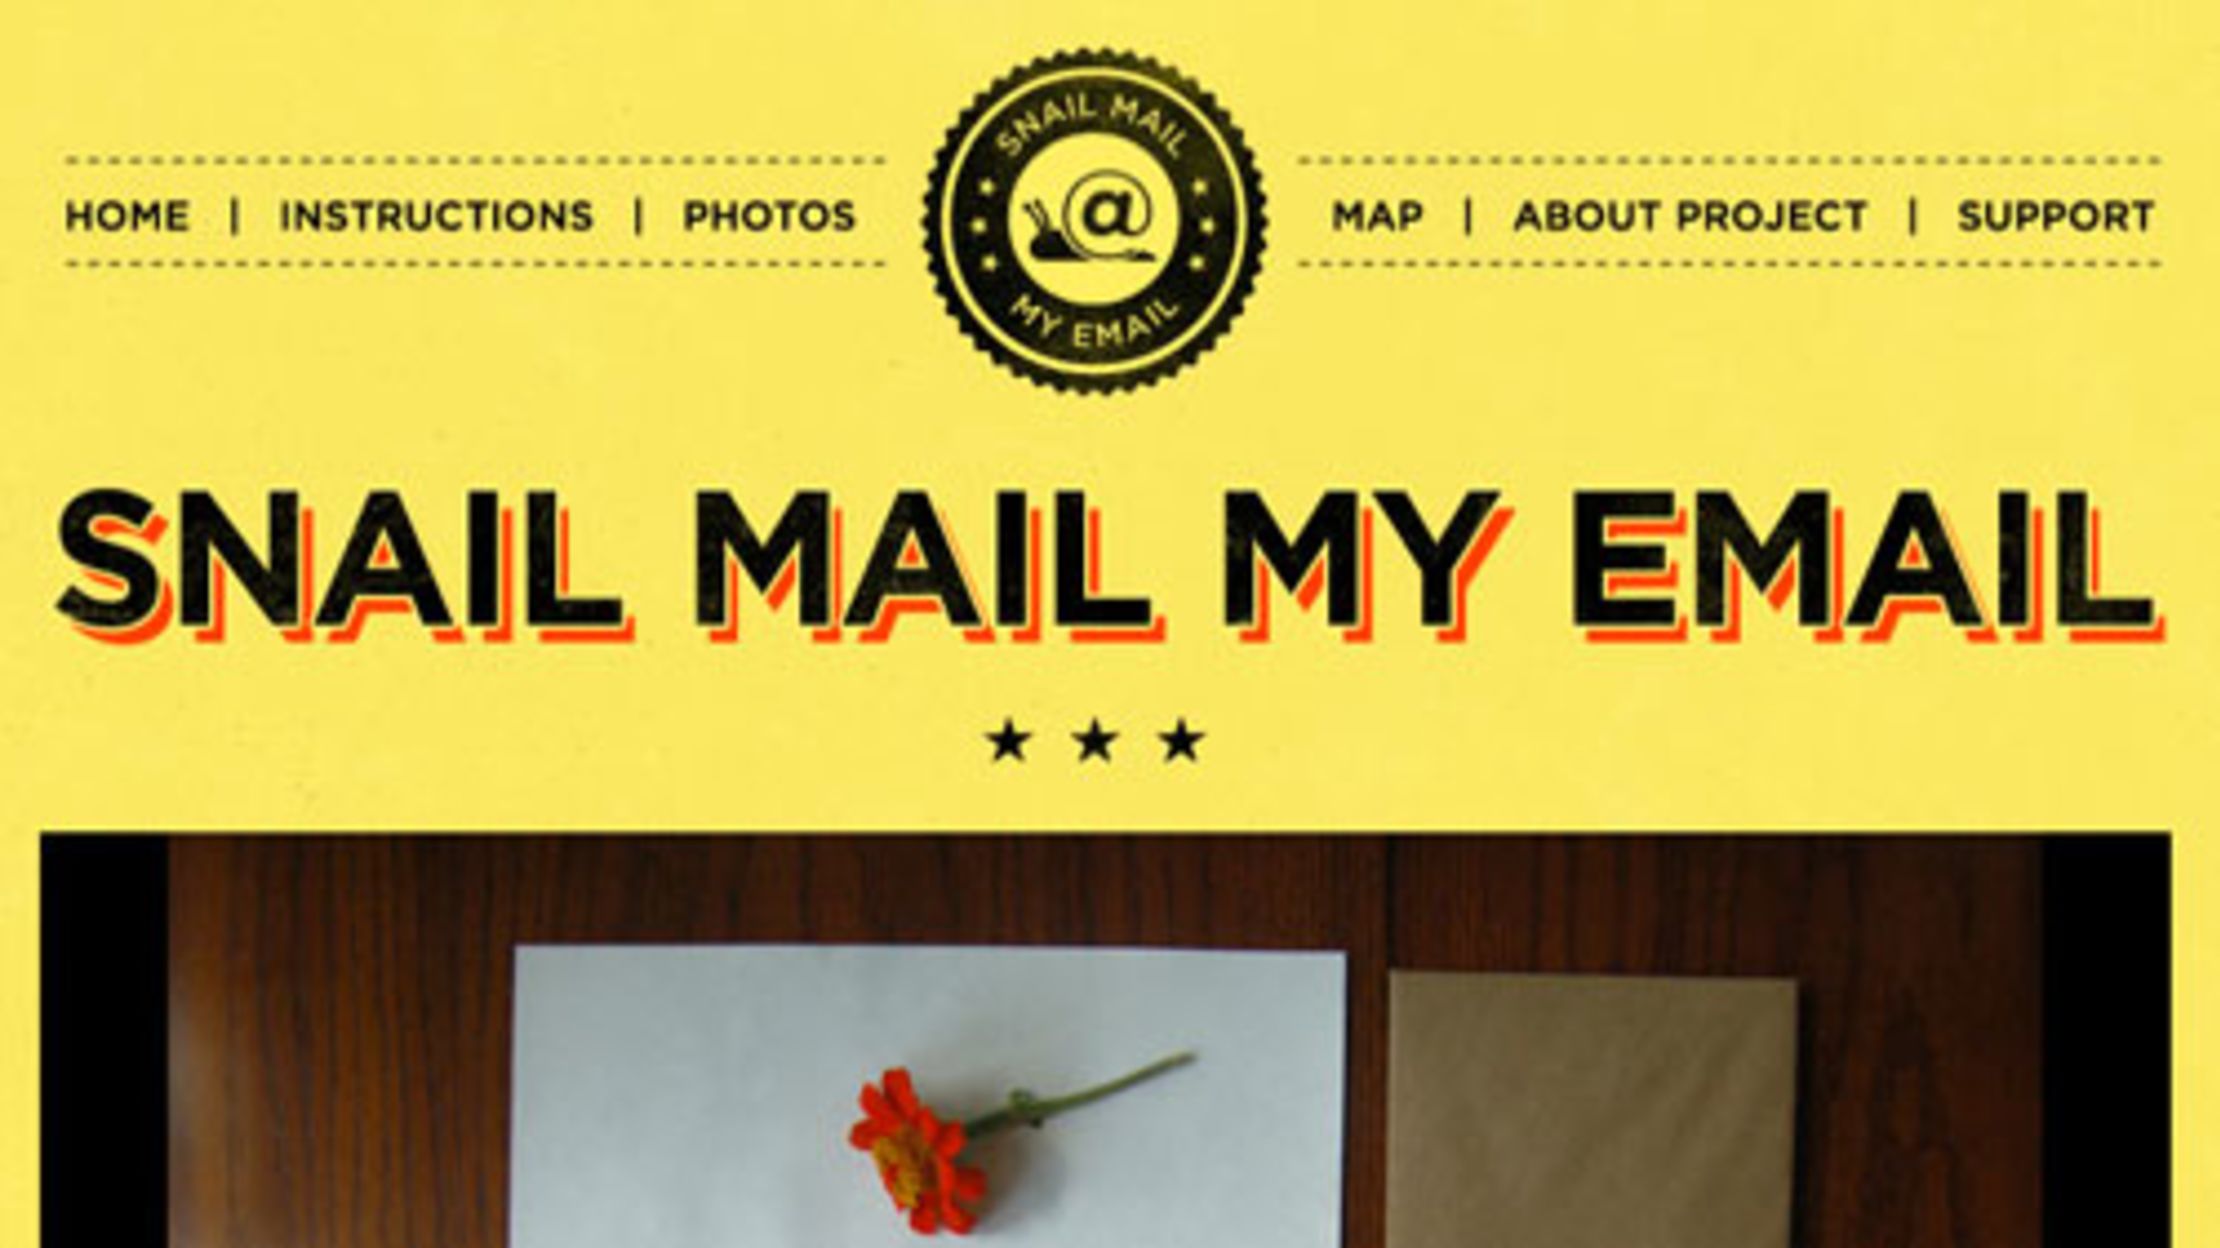 email to snail mail